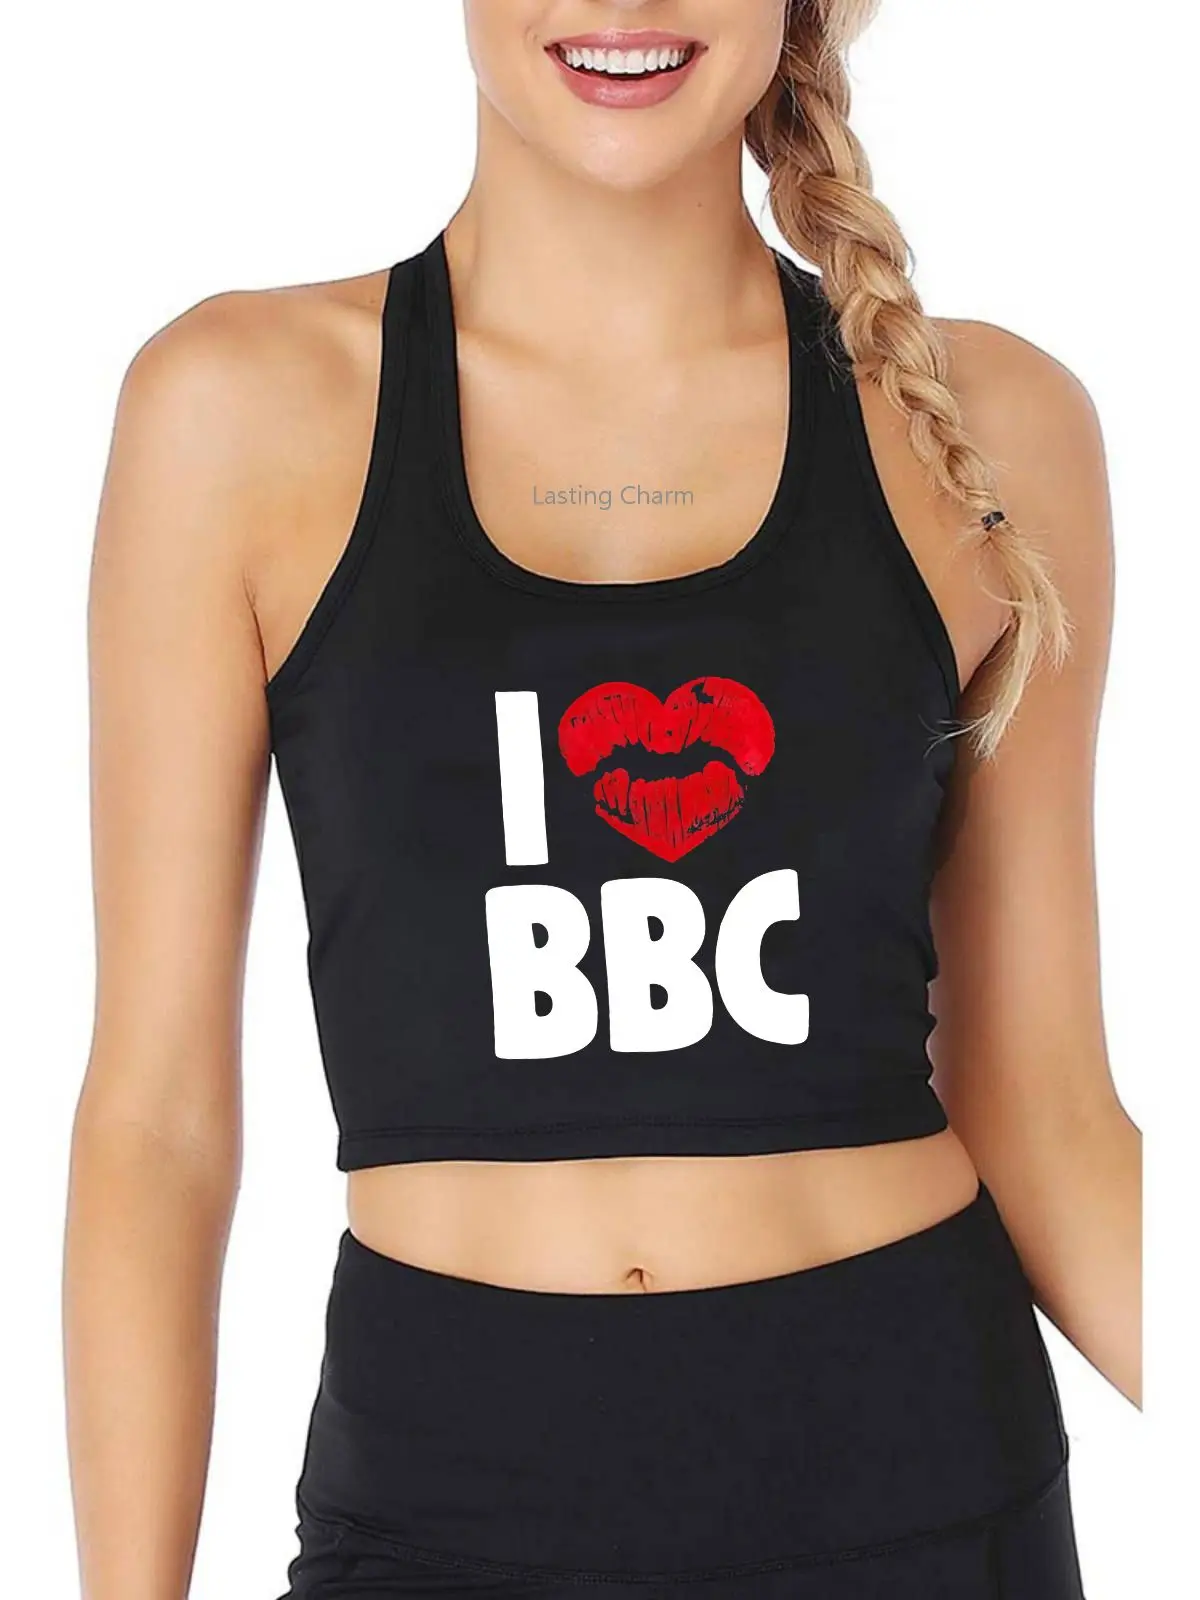 

Sexy Hot Red Lips I Love BBC Tank Top Adult Humor Fun Flirty Print Yoga Sports Workout Crop Top Women's Gym Tops